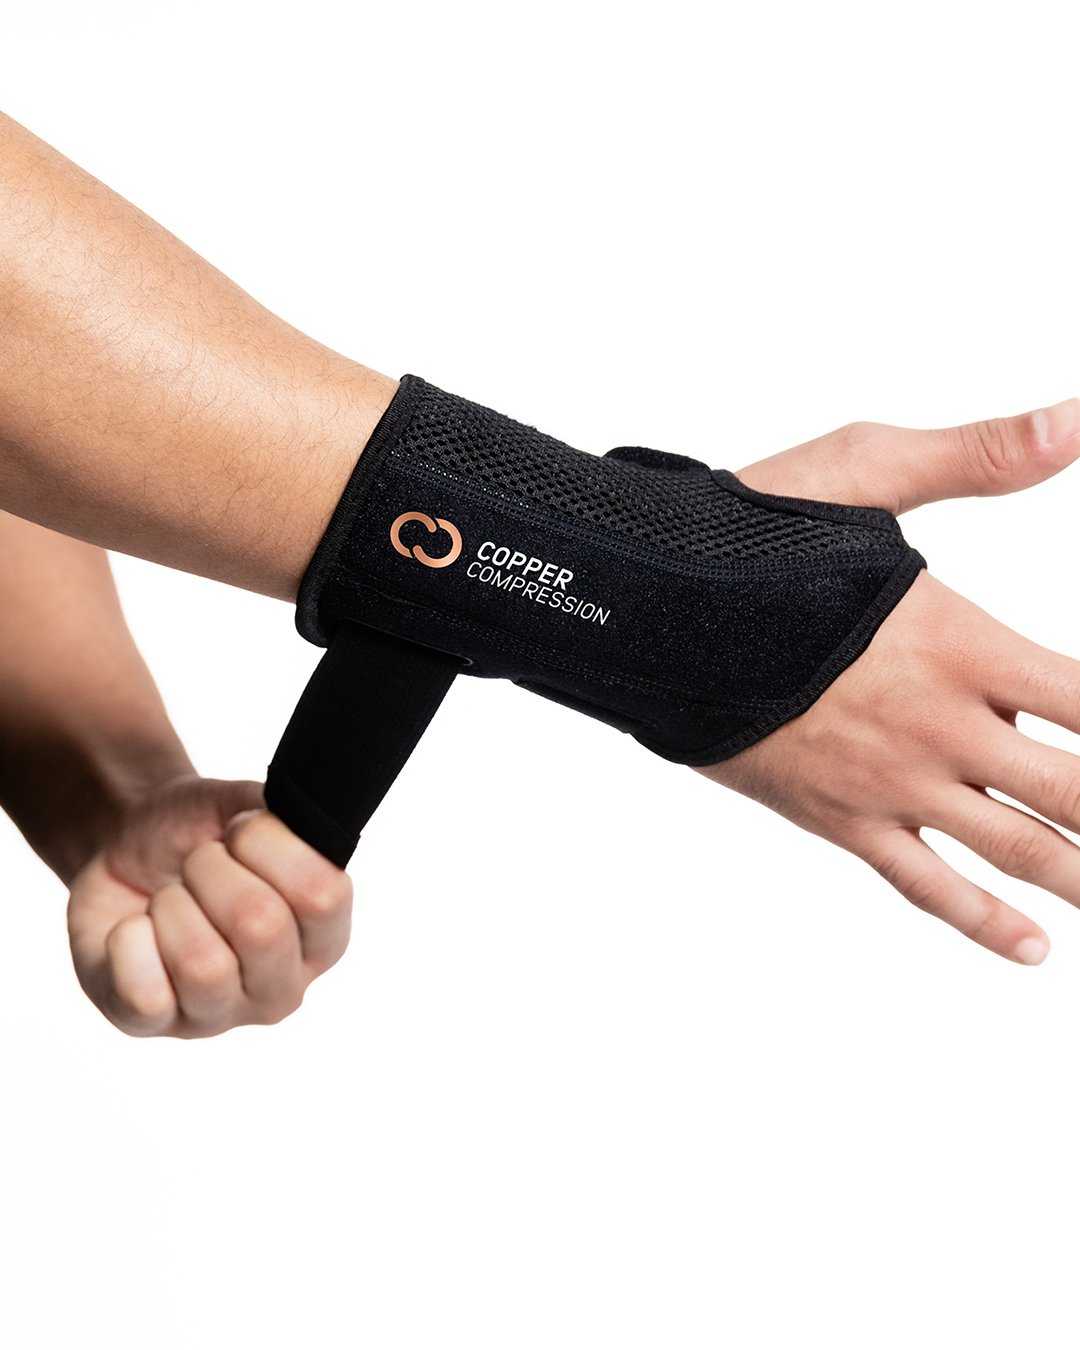 Copper Joe Carpal Tunnel Wrist Brace for Day and Night Support -  Compression Wrist Sleeve For Arthritis Tendonitis RSI and Sprain -  Adjustable Wrist Splint fit For Men and Women (Right Hand